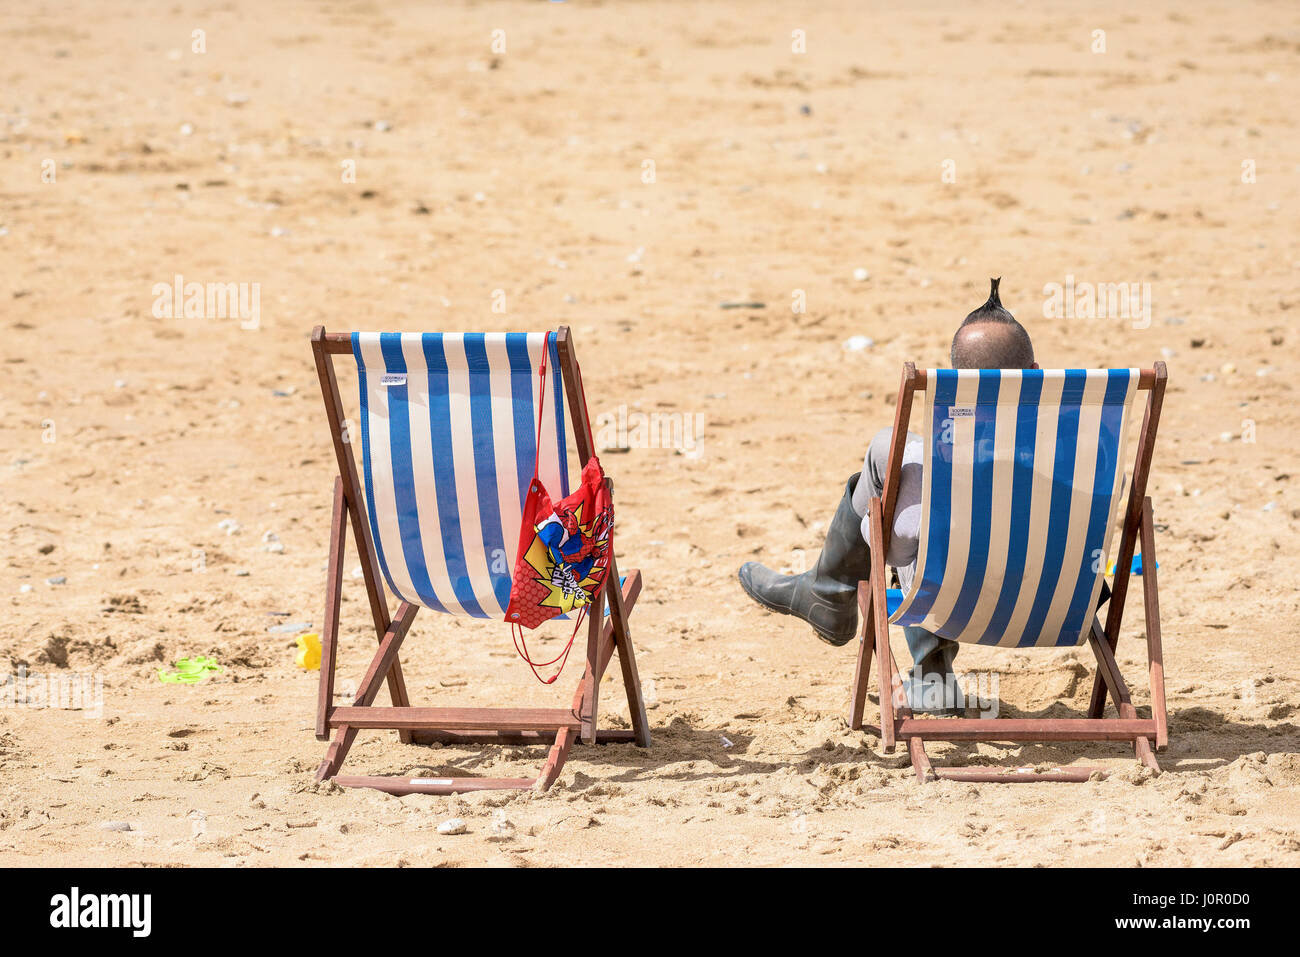 Fistral Beach Newquay Deckchairs Man Mohican Hairstyle Relaxing Relaxation Sitting Seaside Tourism Beach Holiday Vacation Leisure Cornwall Stock Photo